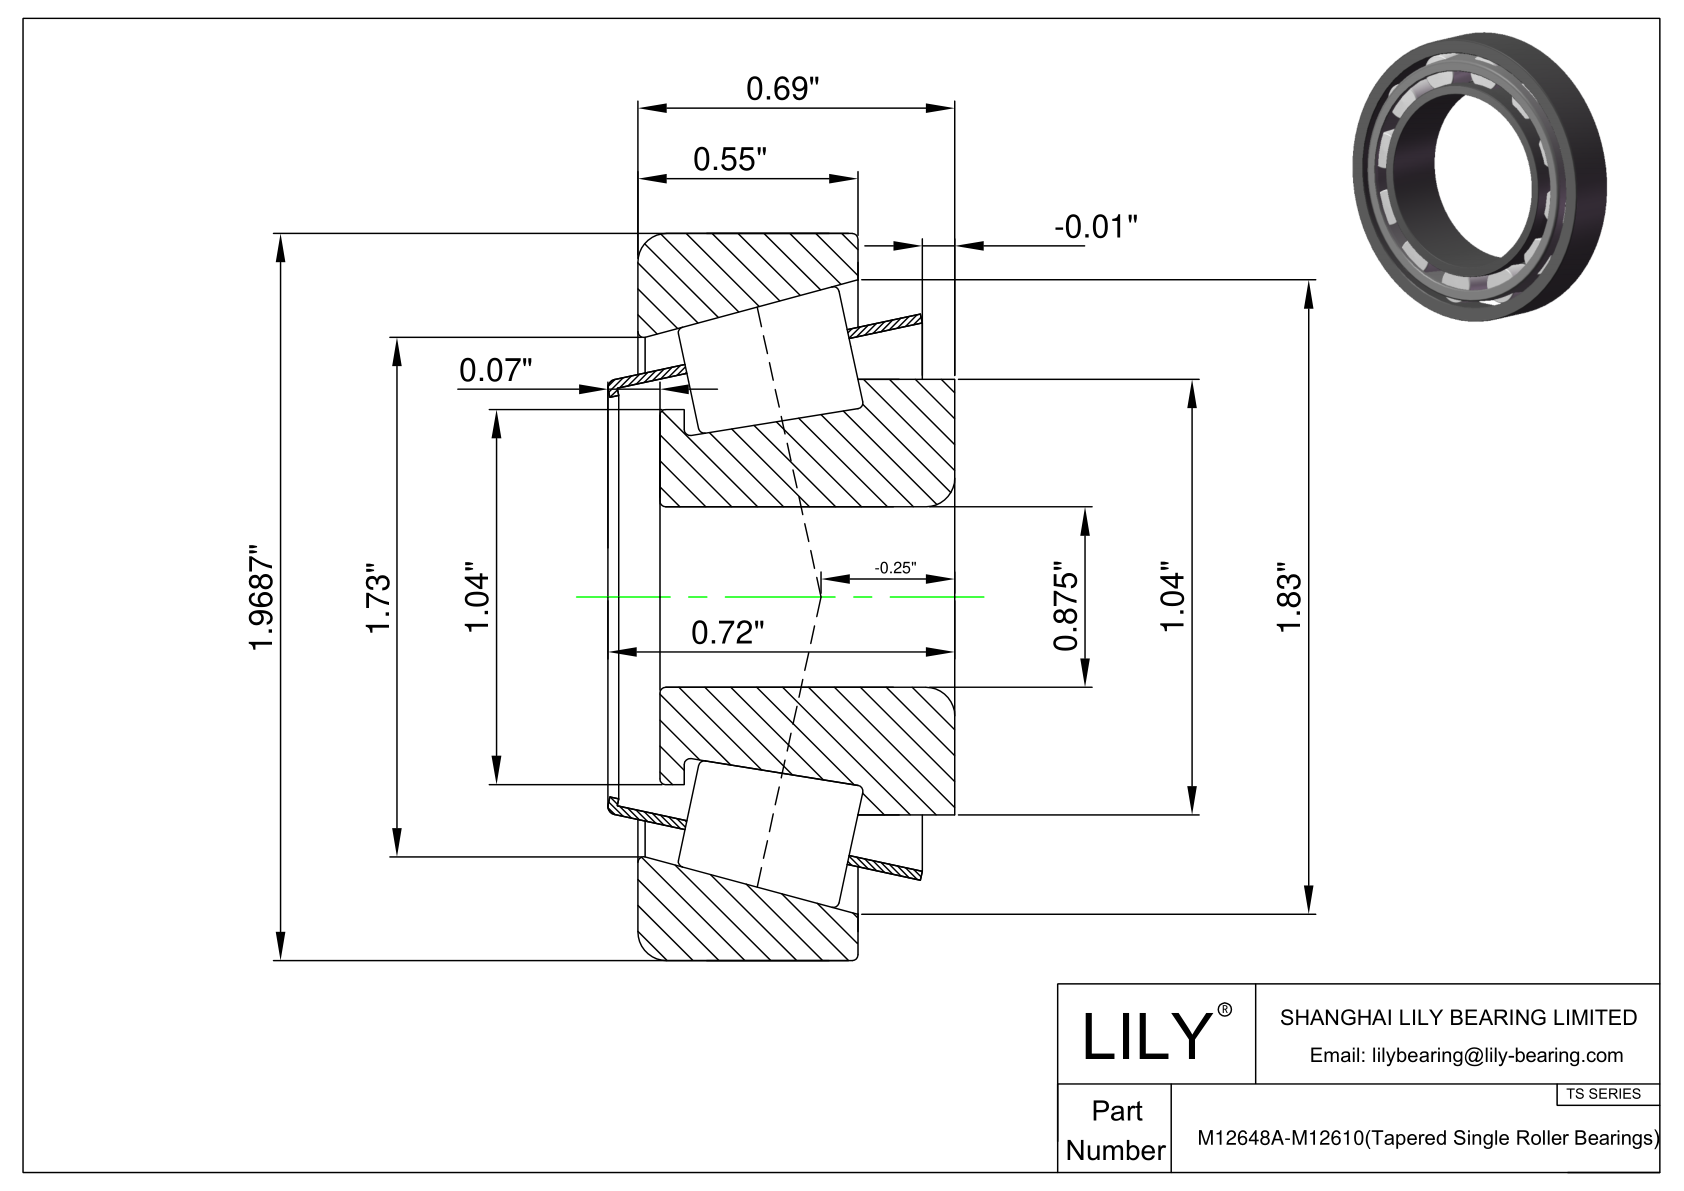 M12648A-M12610 TS (Tapered Single Roller Bearings) (Imperial) cad drawing